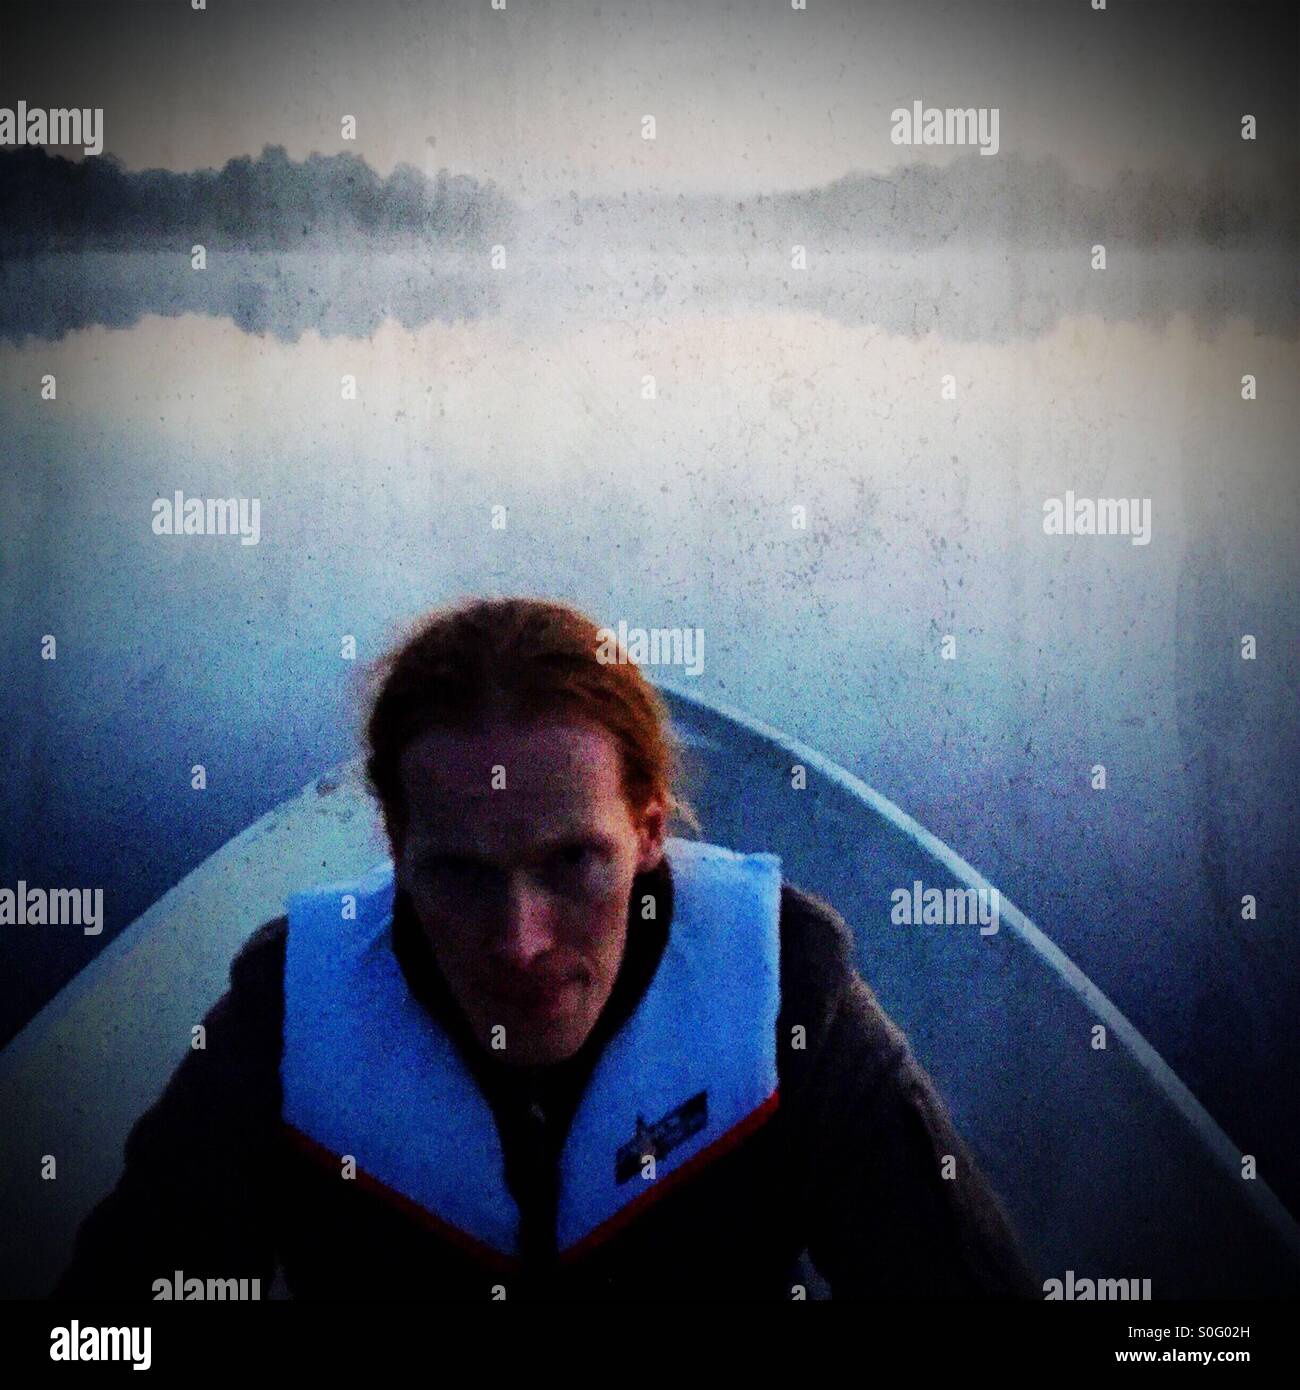 A red headed man rowing a boat Stock Photo